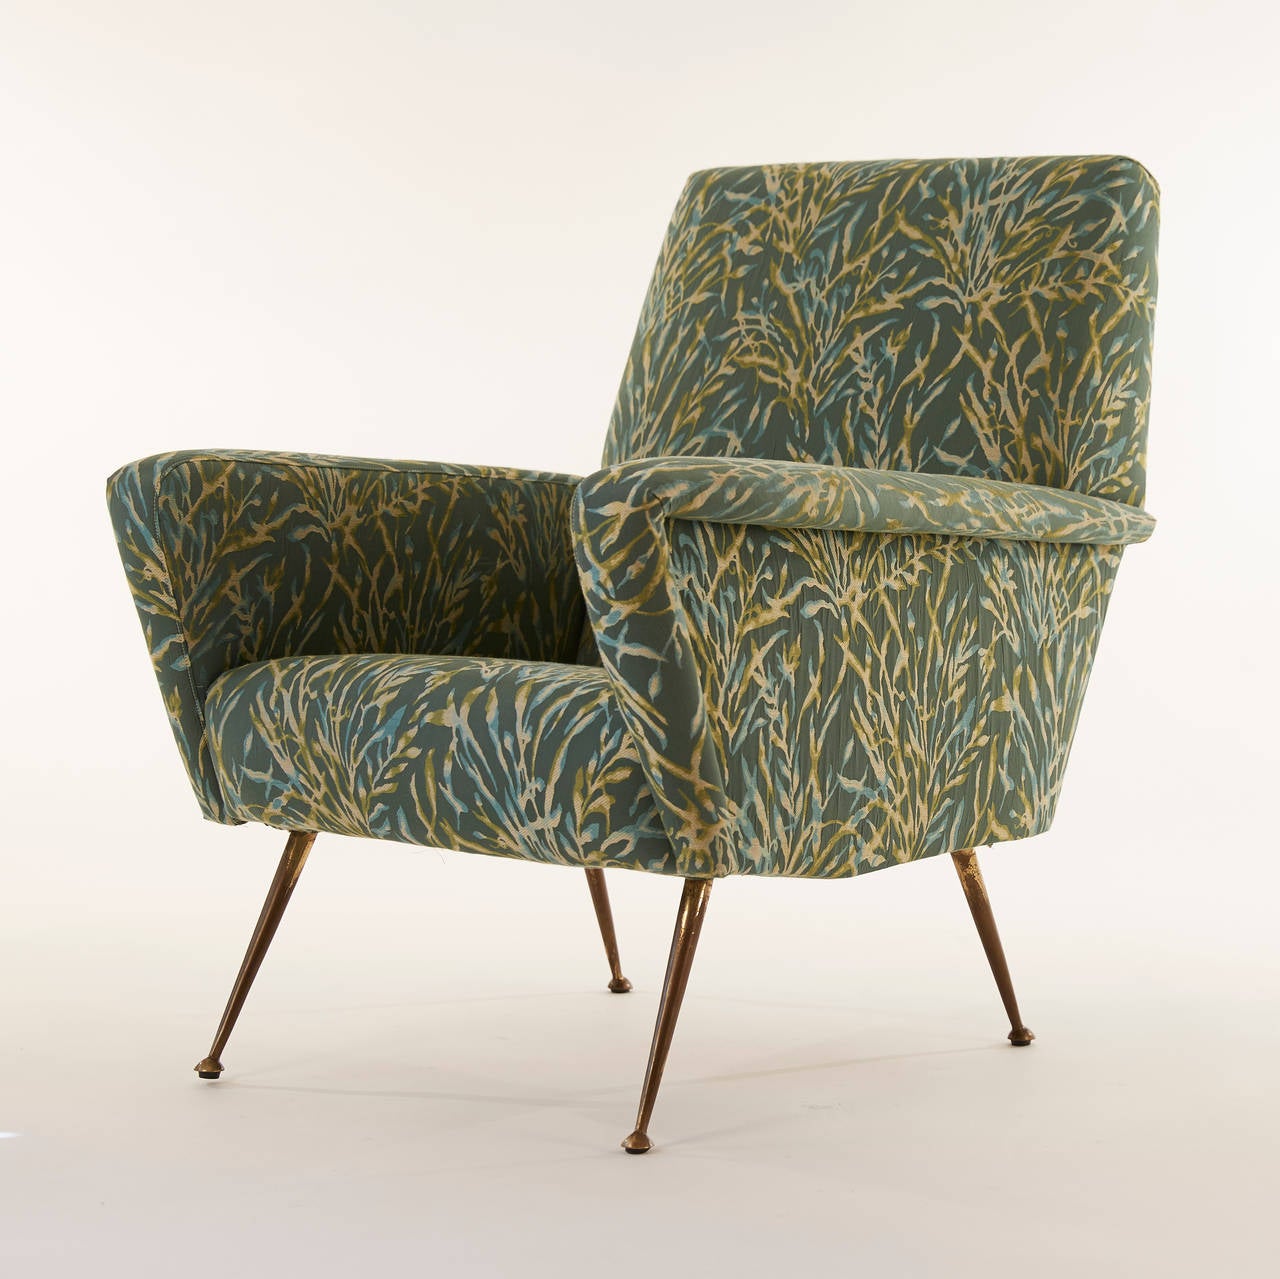 This elegant pair of armchairs with brass legs has been reupholstered in a whimsical Rubelli 